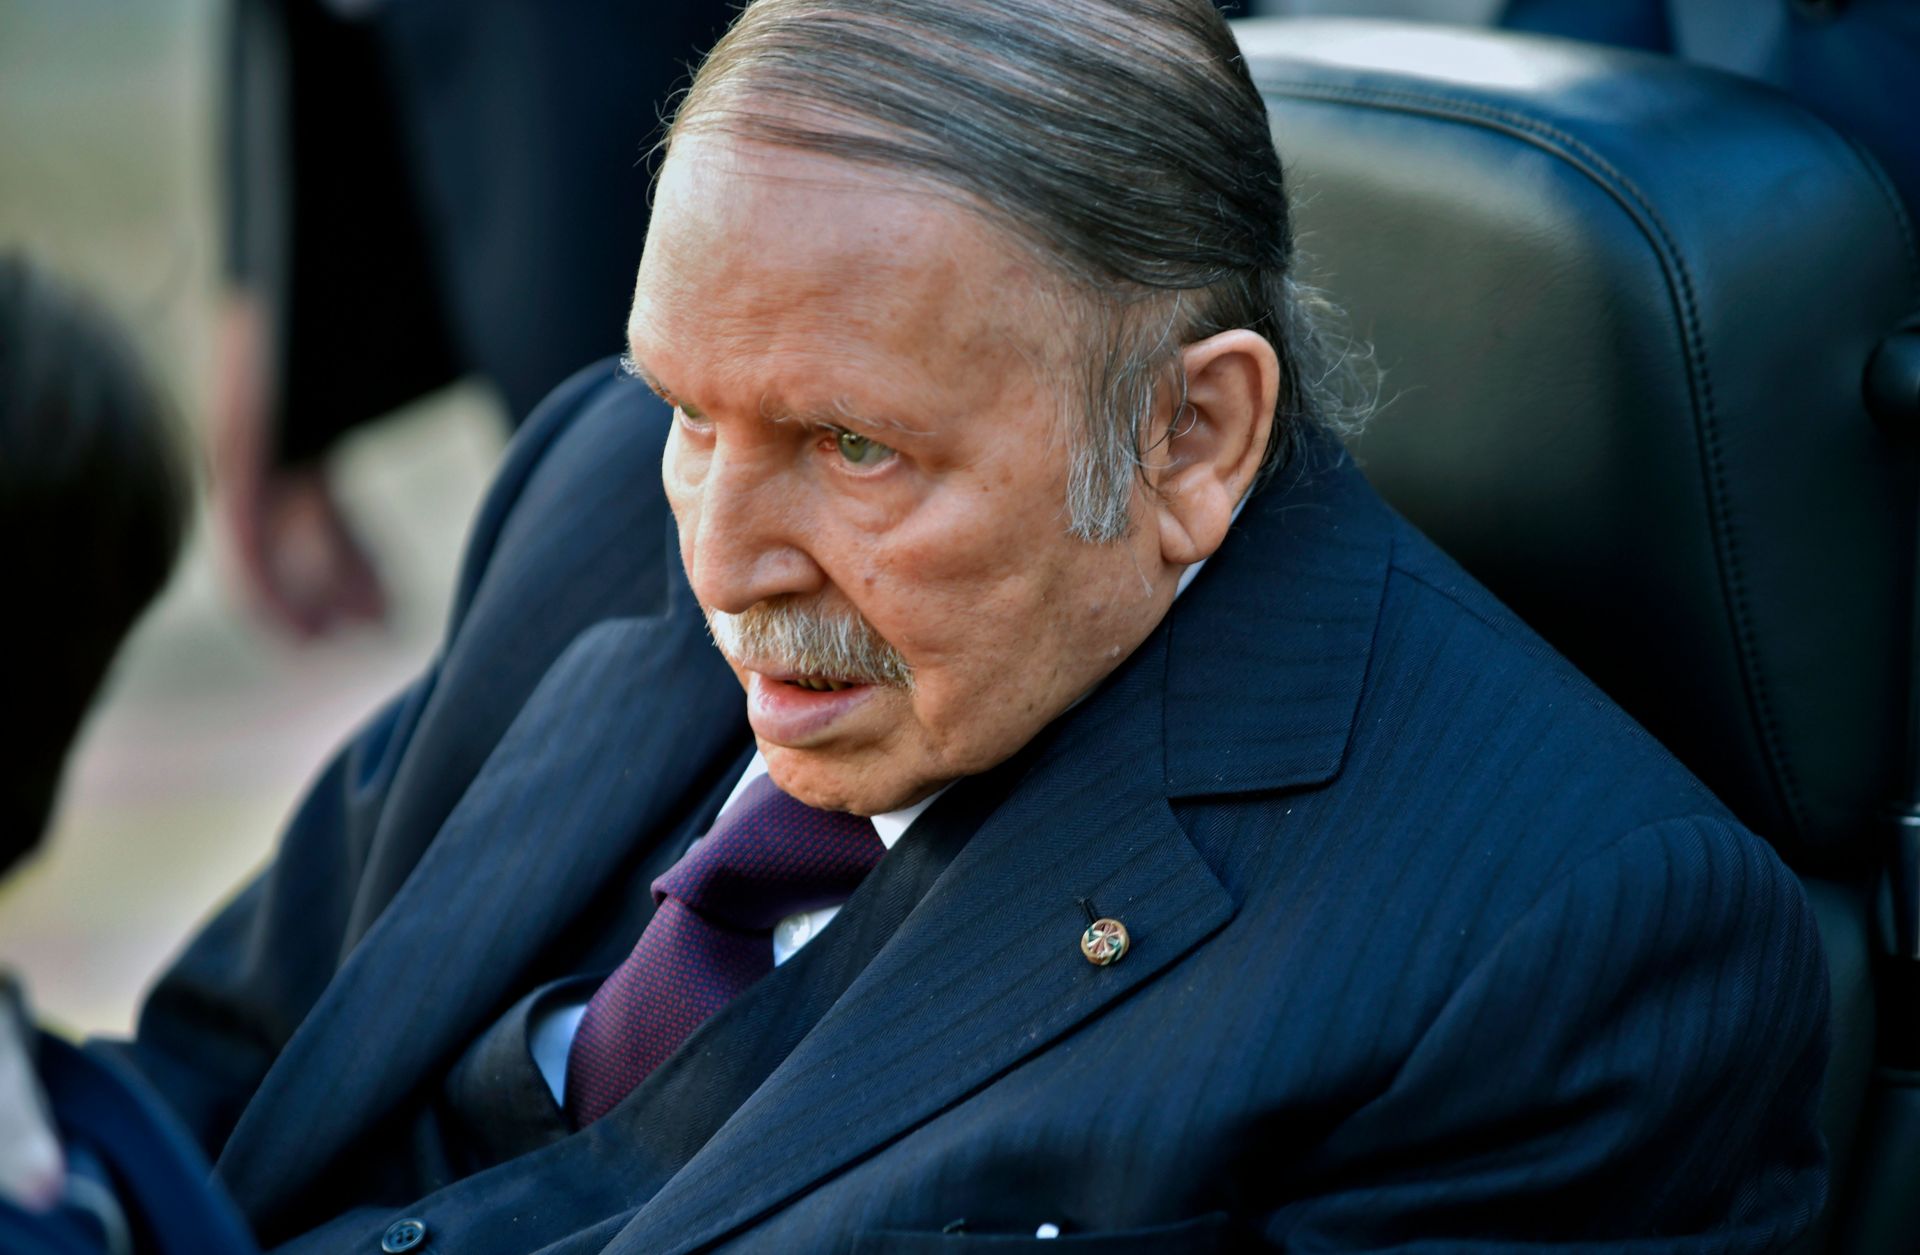 Algerian President Abdel Aziz Bouteflika is seen heading to vote at a polling station in Algiers on November 23, 2017.